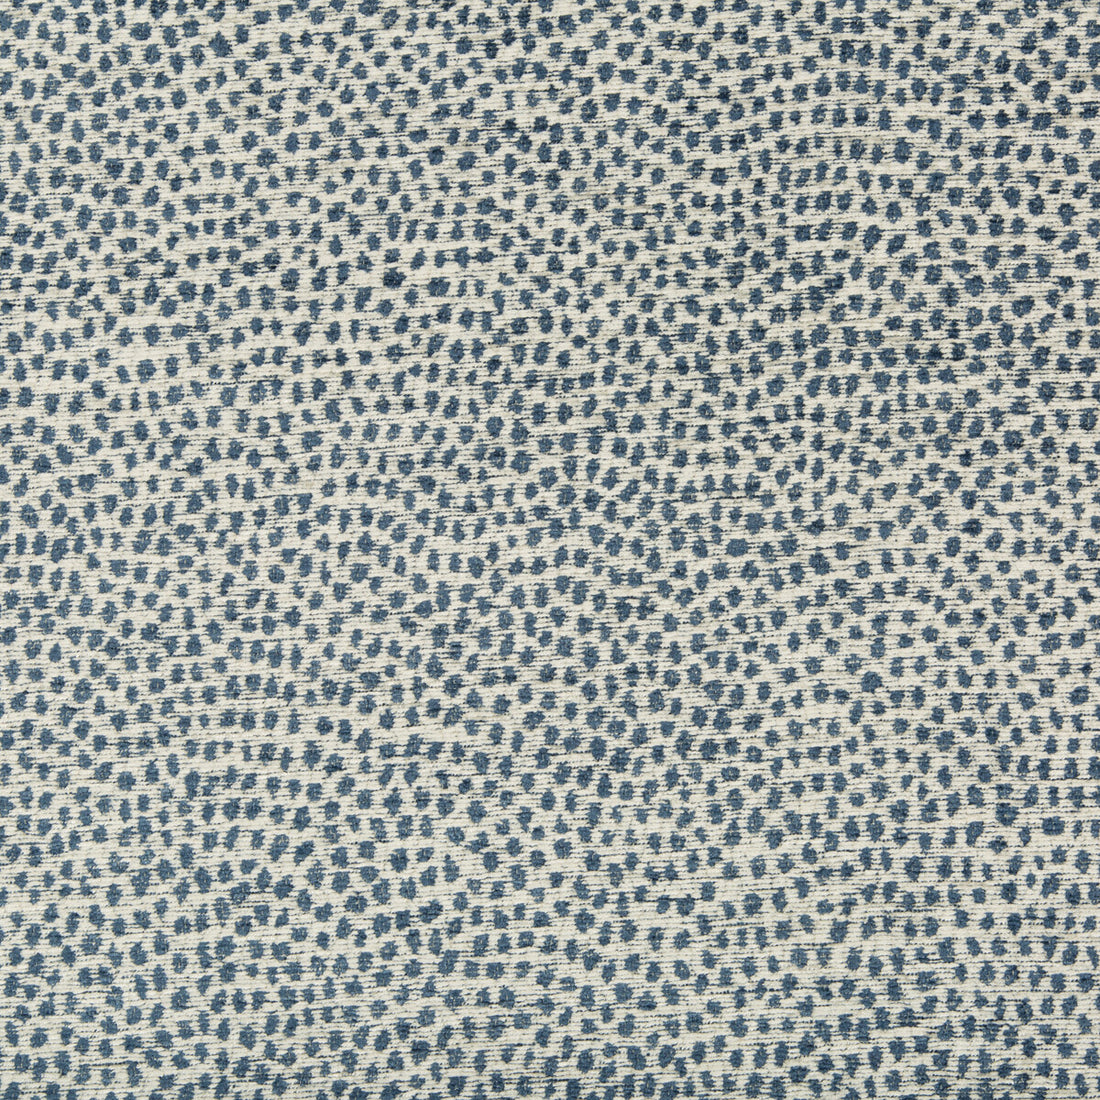 Kravet Design fabric in 34971-5 color - pattern 34971.5.0 - by Kravet Design in the Performance Crypton Home collection